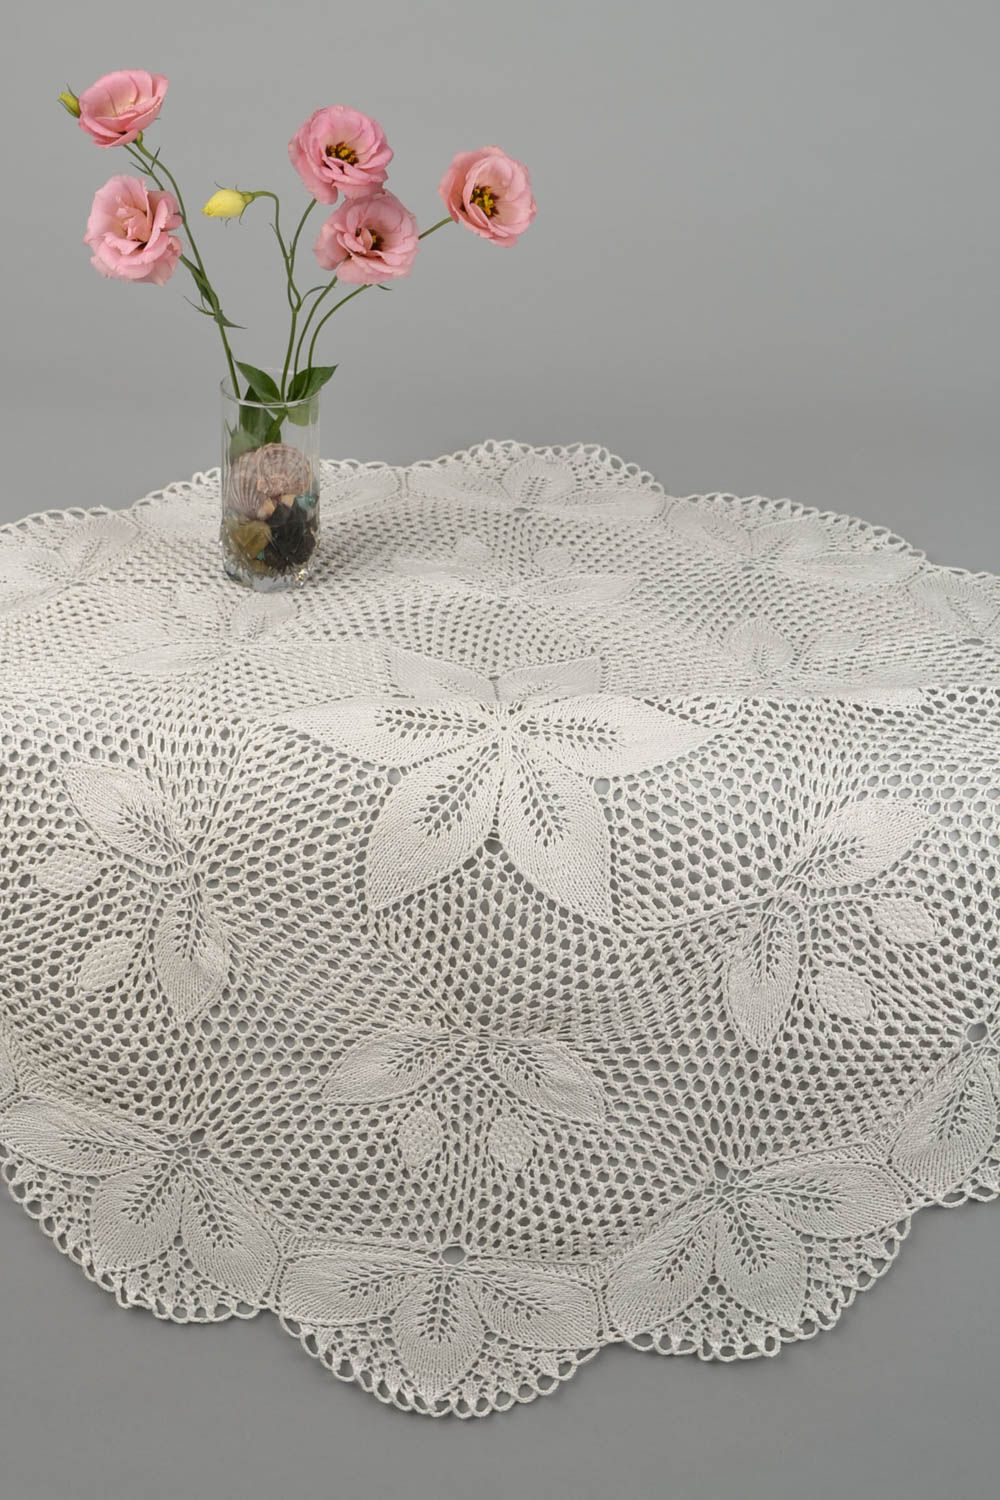 Openwork knitted tablecloth handmade lace napkin vintage style interior decor photo 1